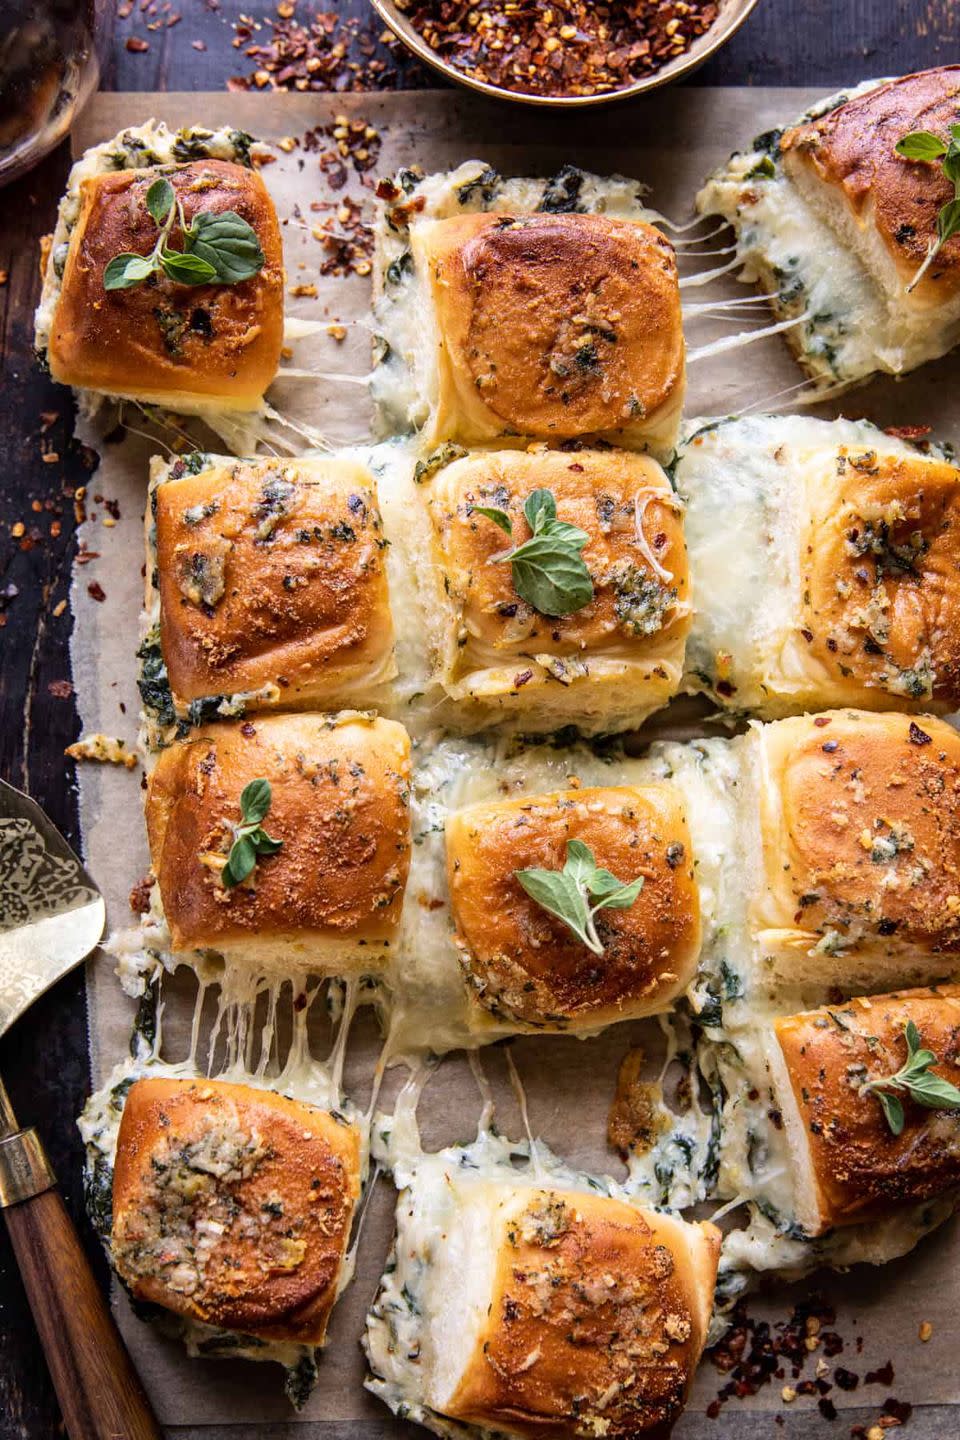 12) Spinach and Artichoke Dip Sliders